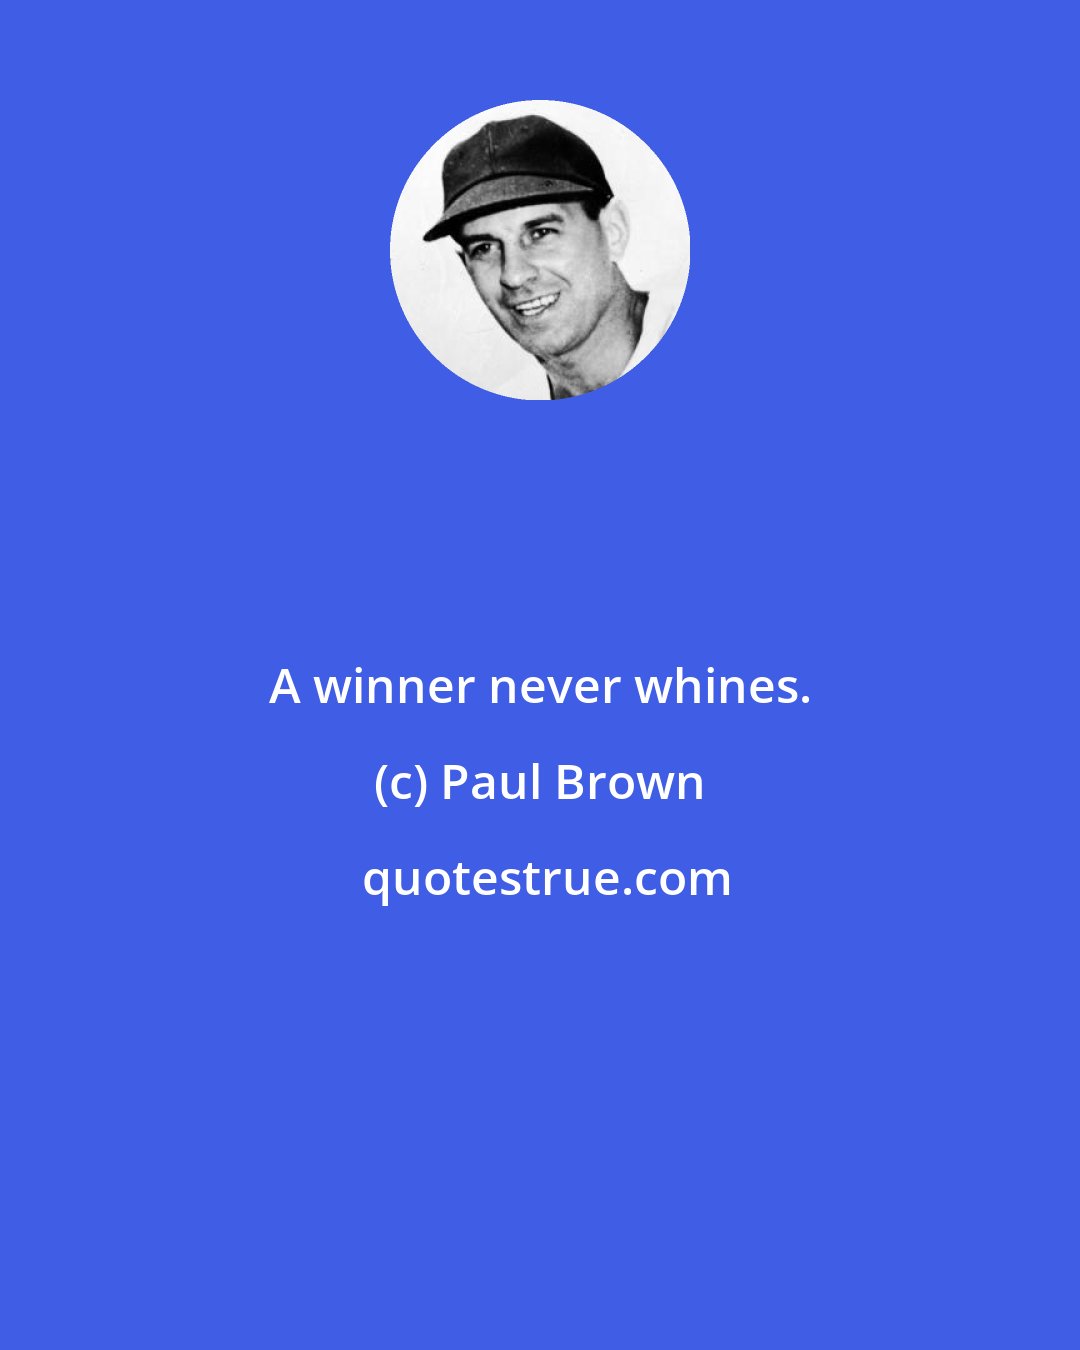 Paul Brown: A winner never whines.